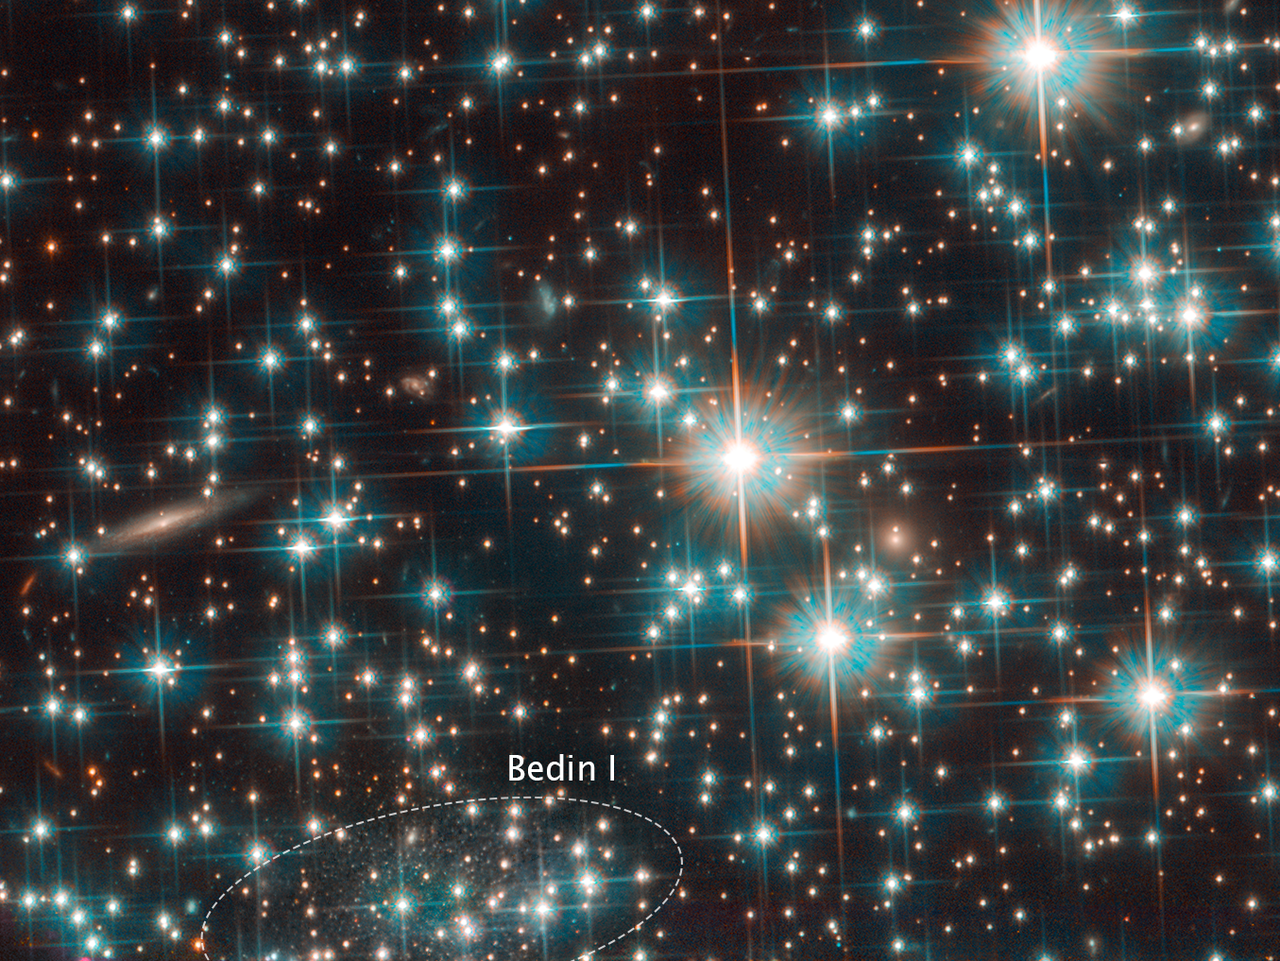 Hubble Accidentally Discovers A New Galaxy In Cosmic